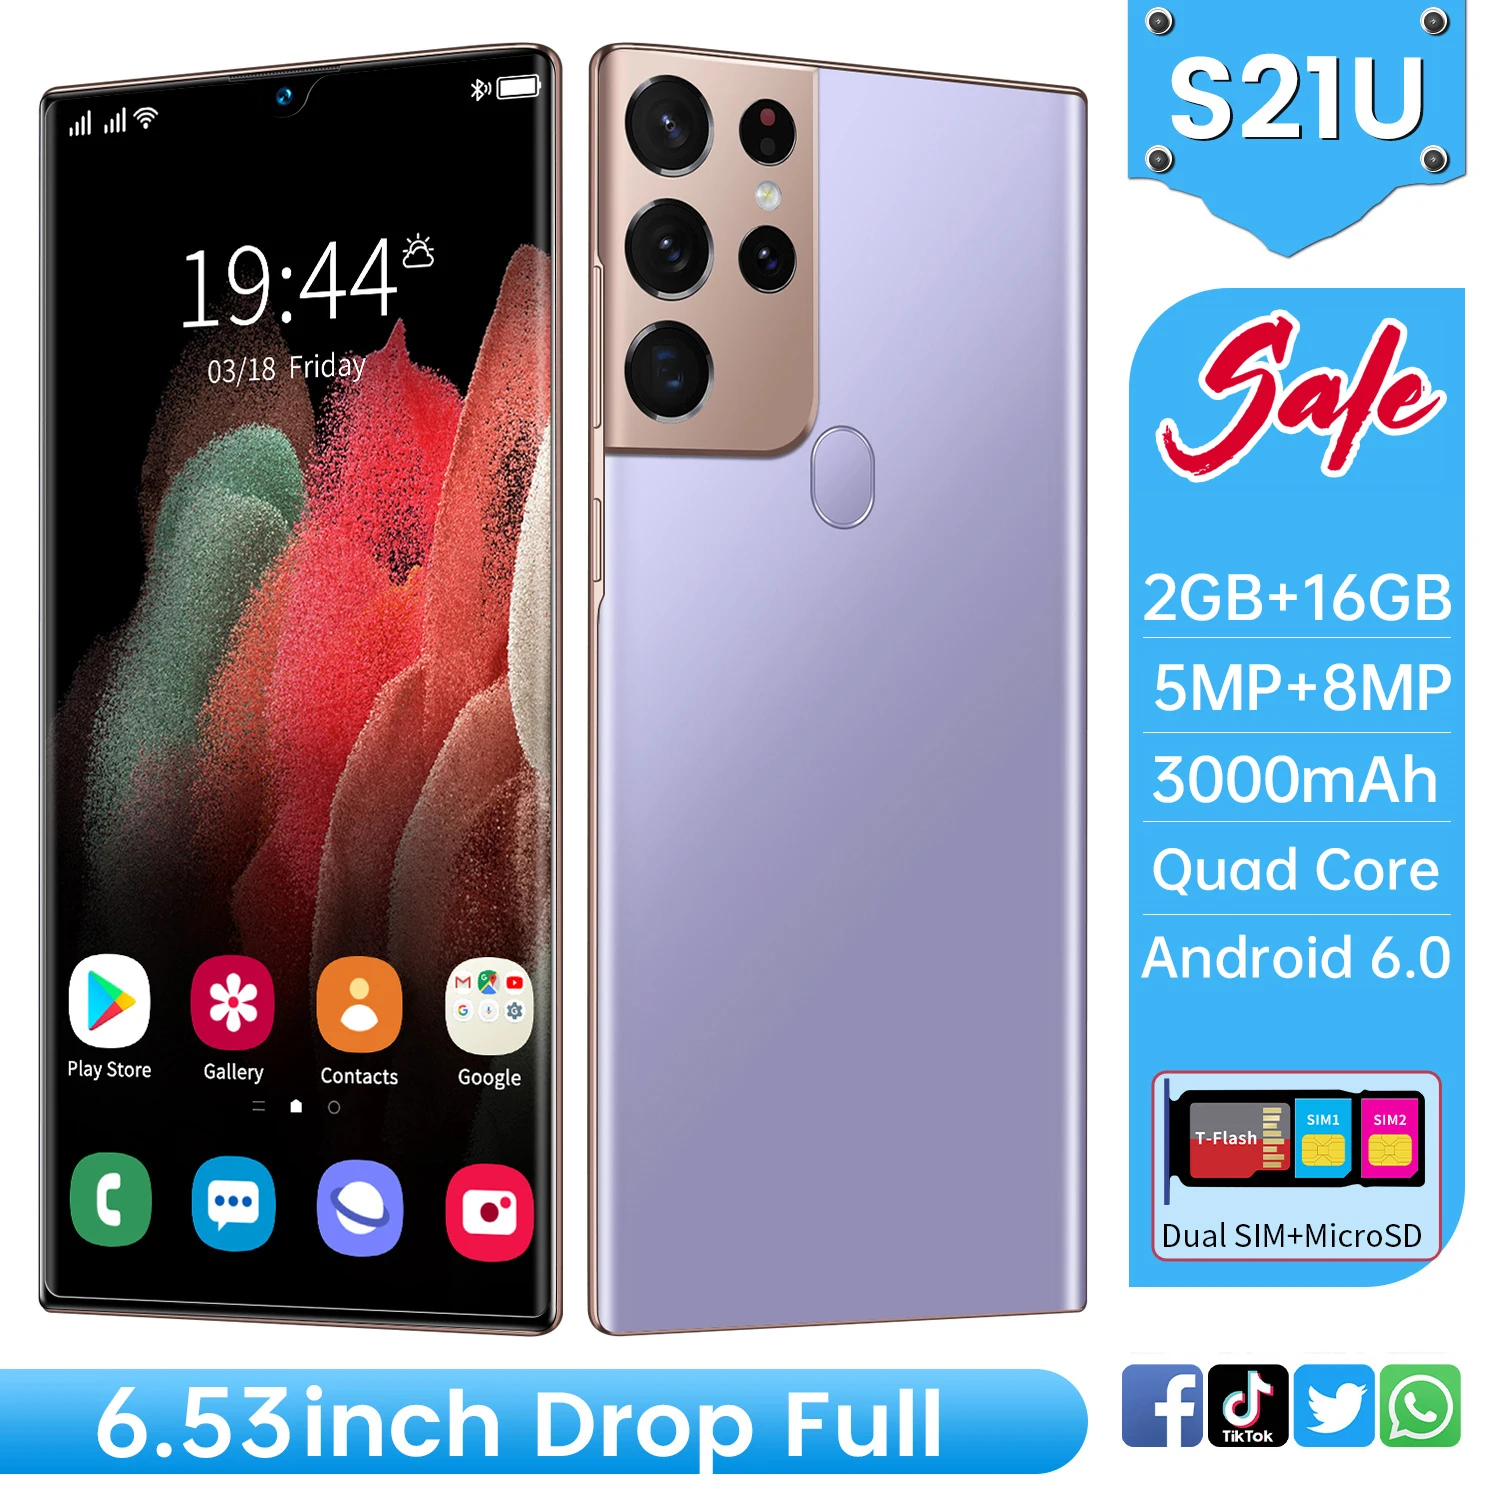 

S21U Hot money smartphone 2 GB RAM + 16GB ROM Large memory Android mobile phone 5MP + 8MP HD Camera cellphone